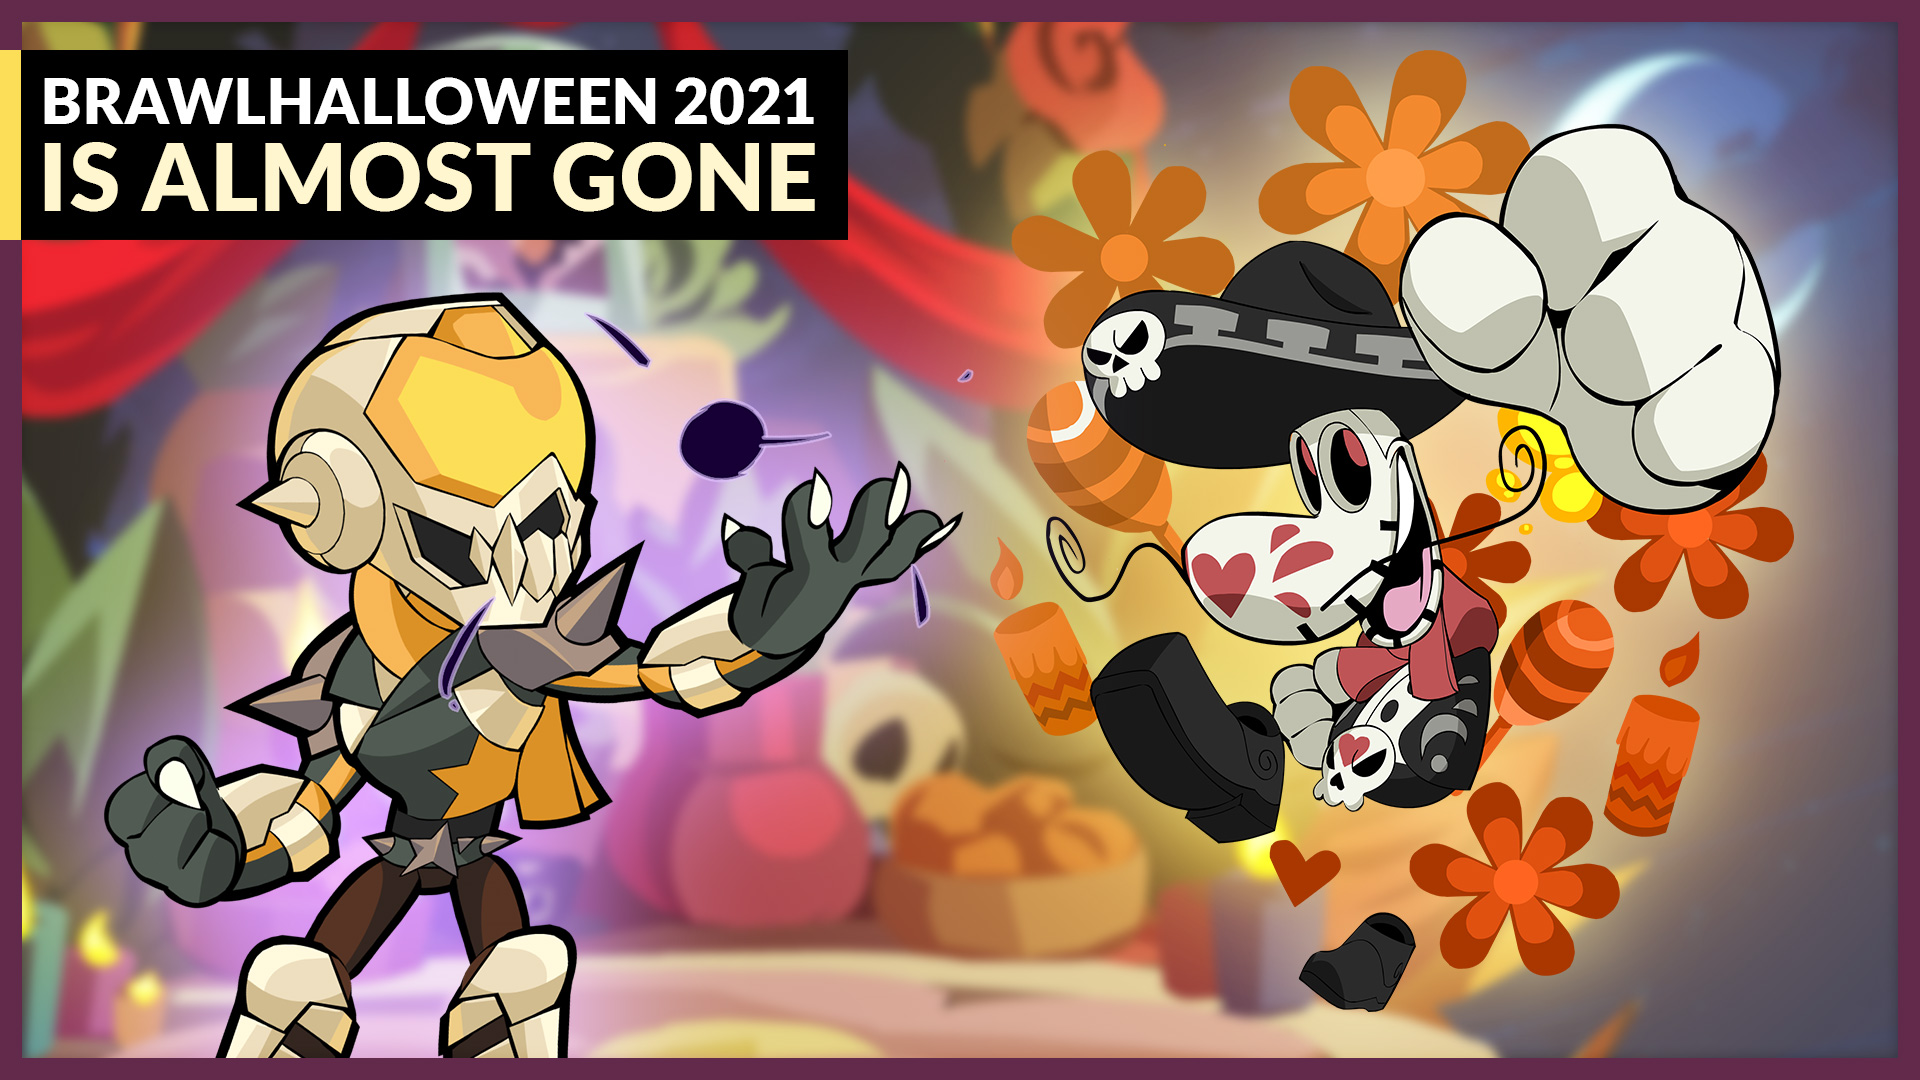 The Crypt is Closing on Brawlhalloween 2021!